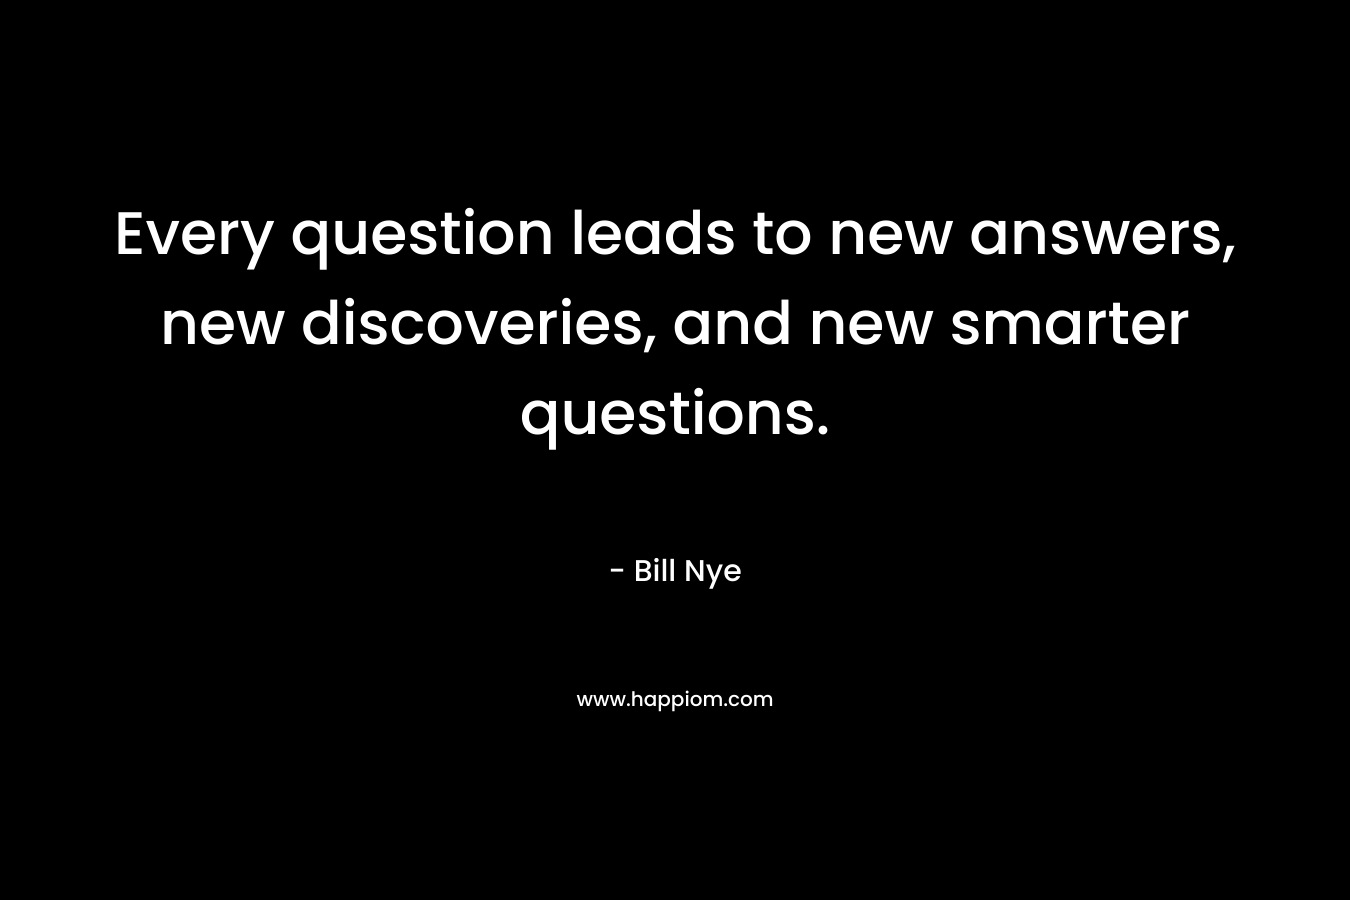 Every question leads to new answers, new discoveries, and new smarter questions.